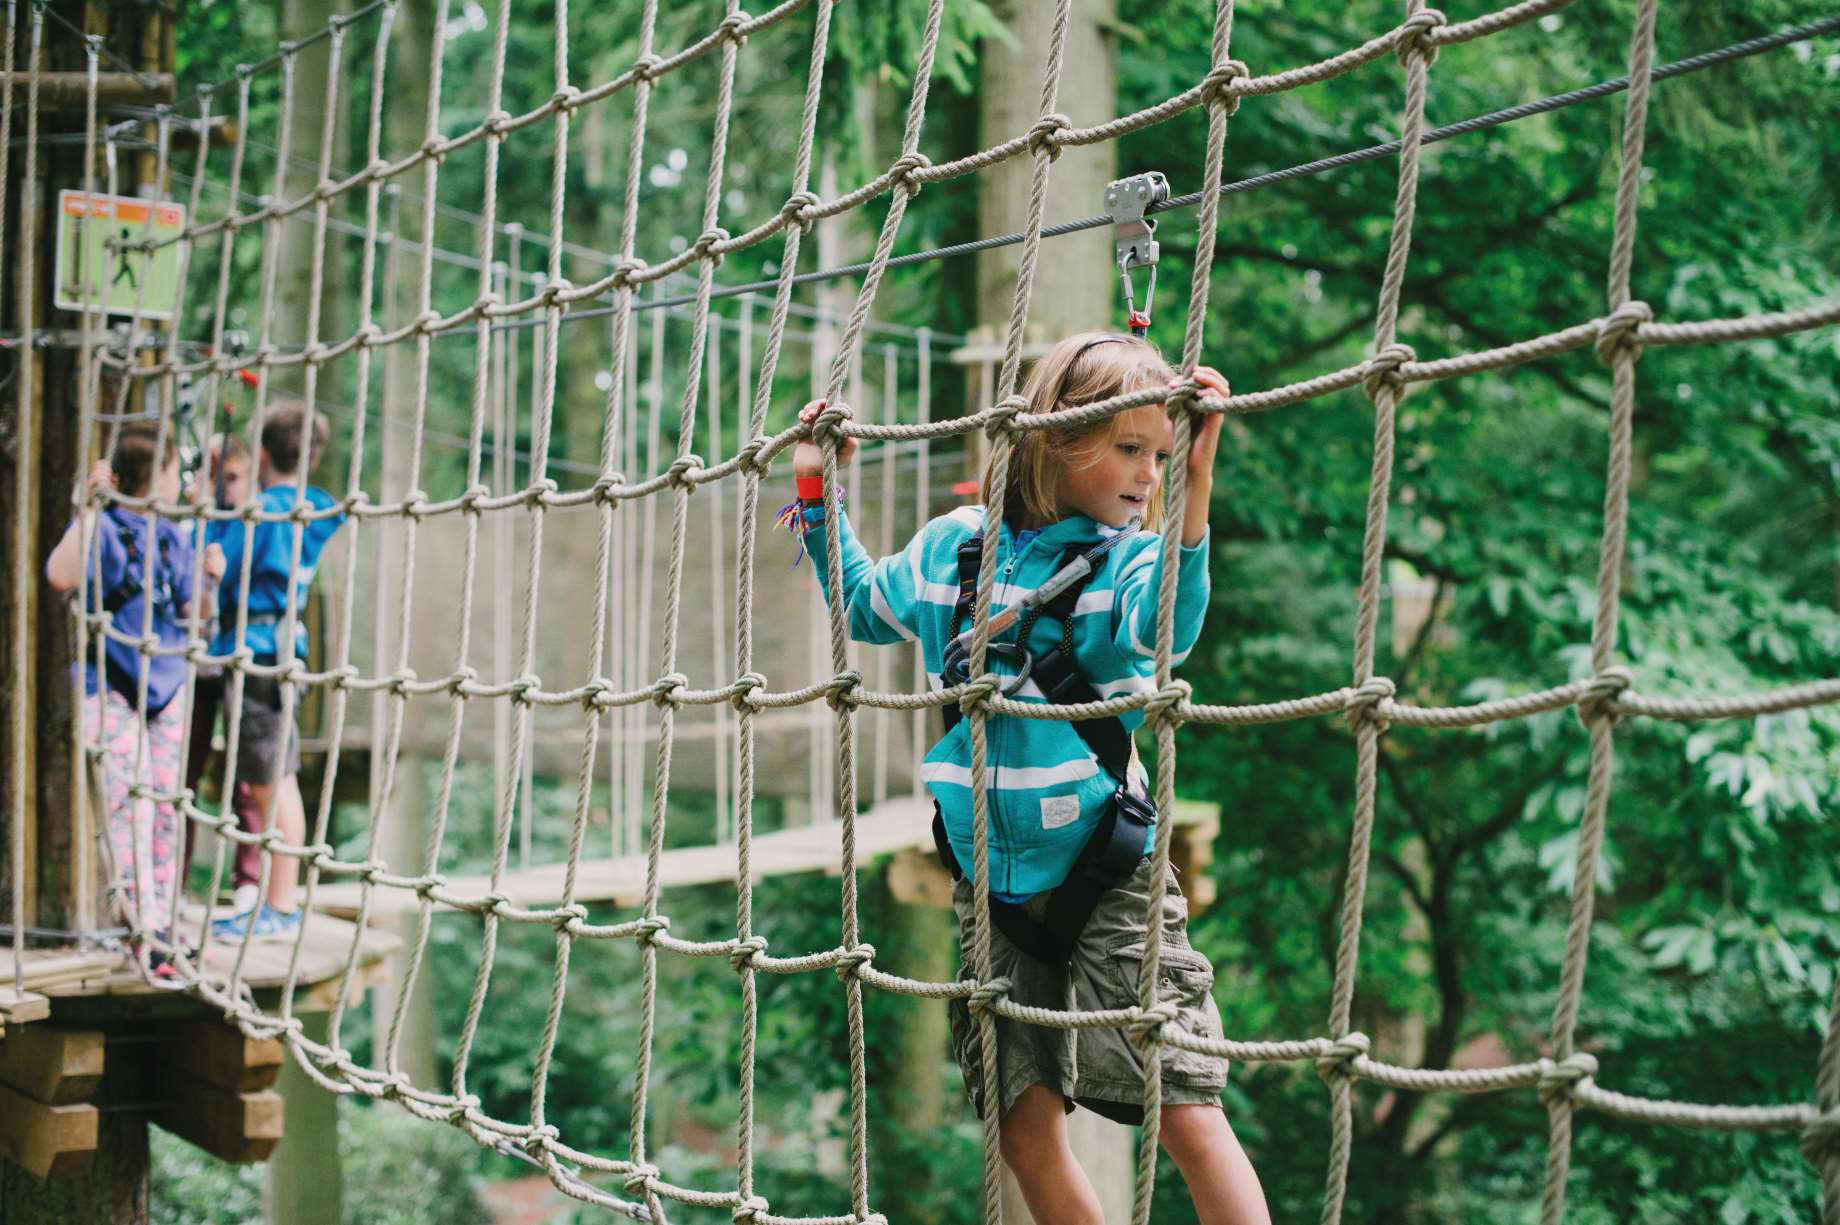 Hang out at Go Ape this summer